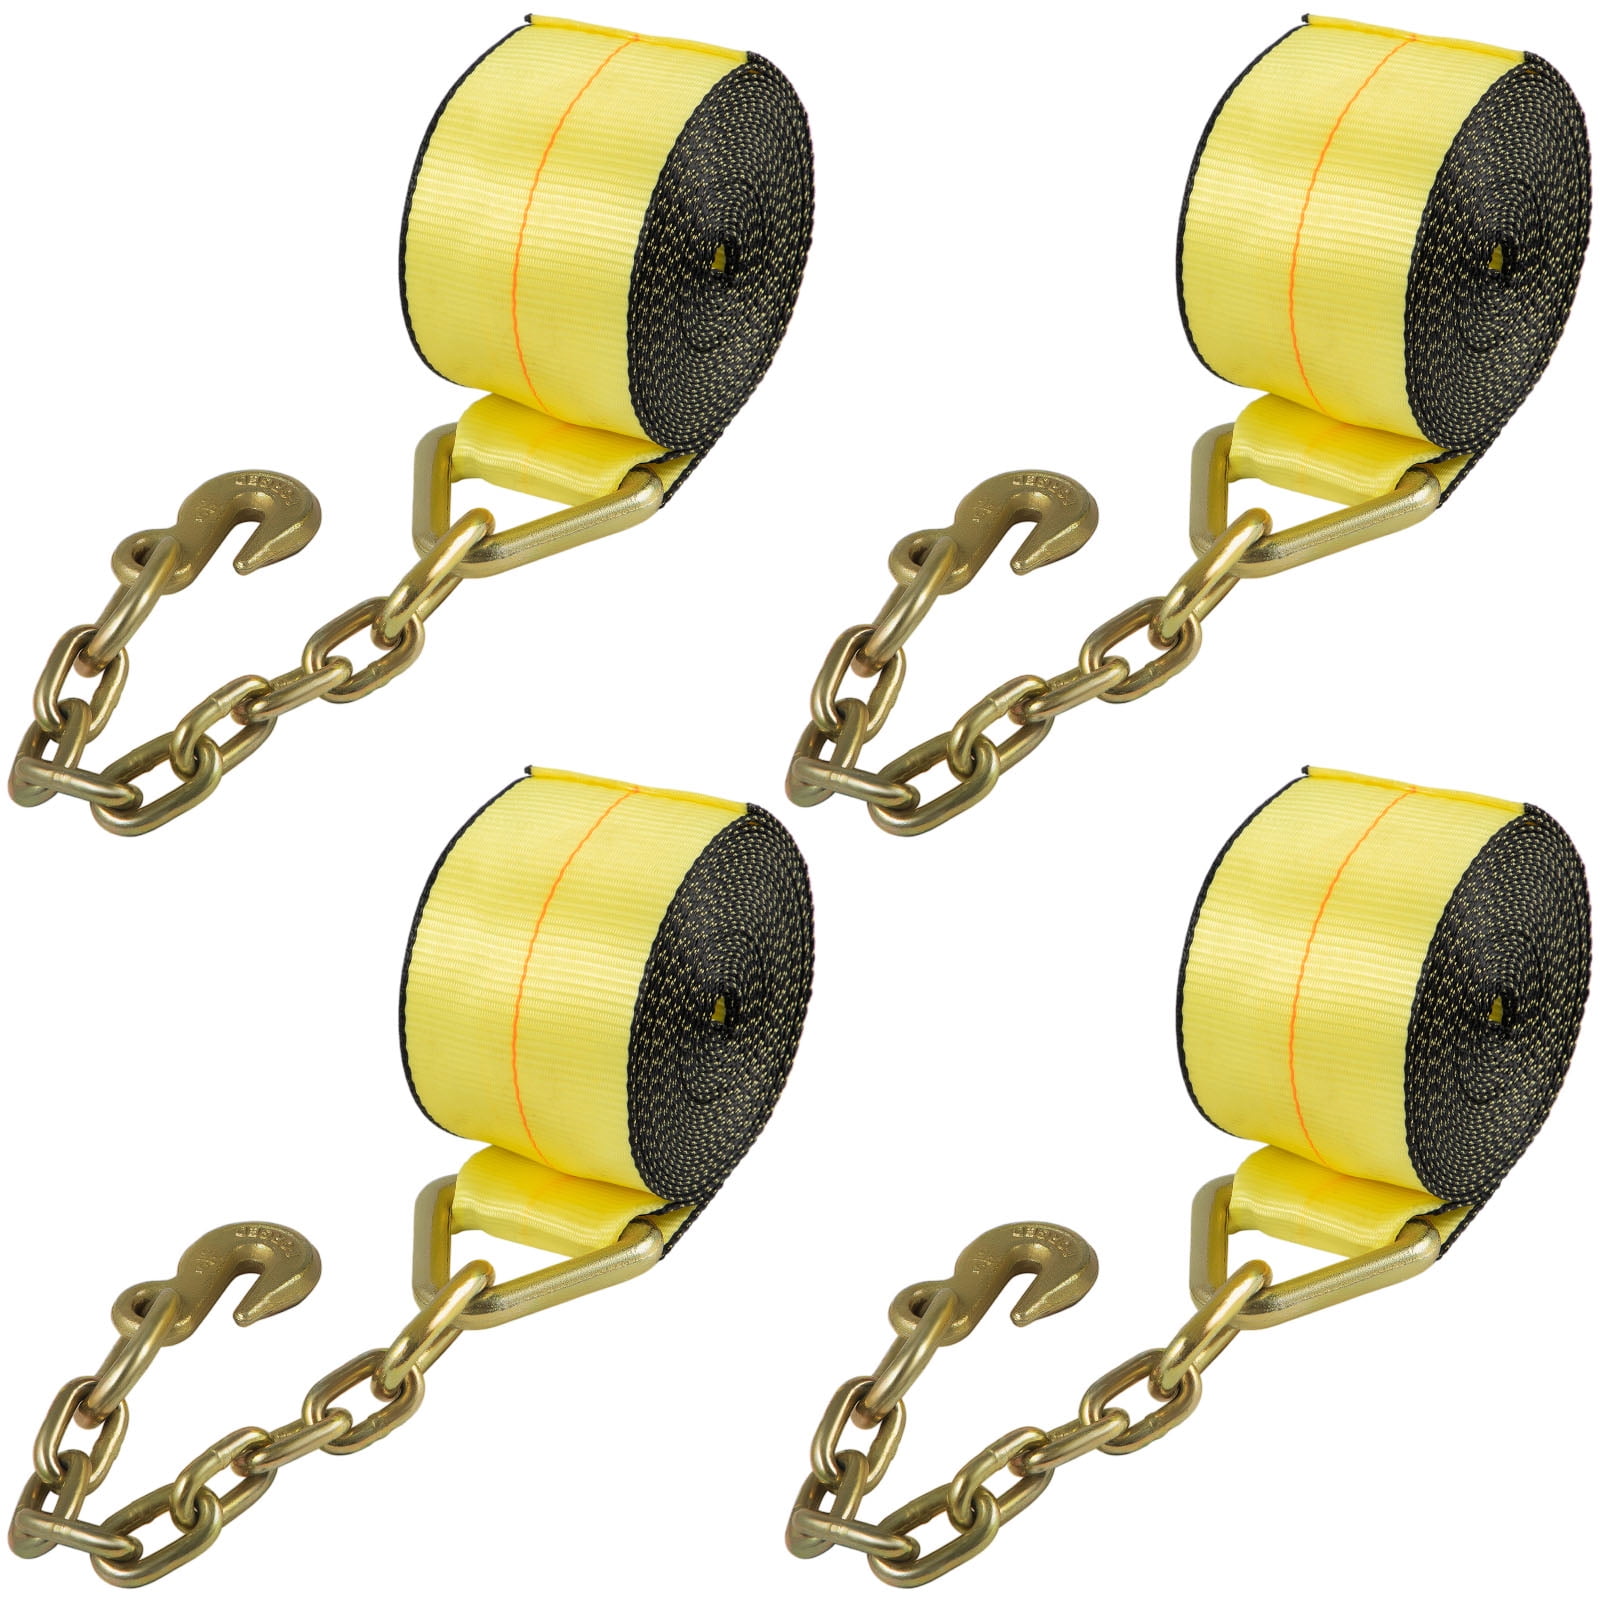 2 Chain End Ratchet Straps Flatbed Tow Truck Trailer Stake Pocket Tie Down 30'